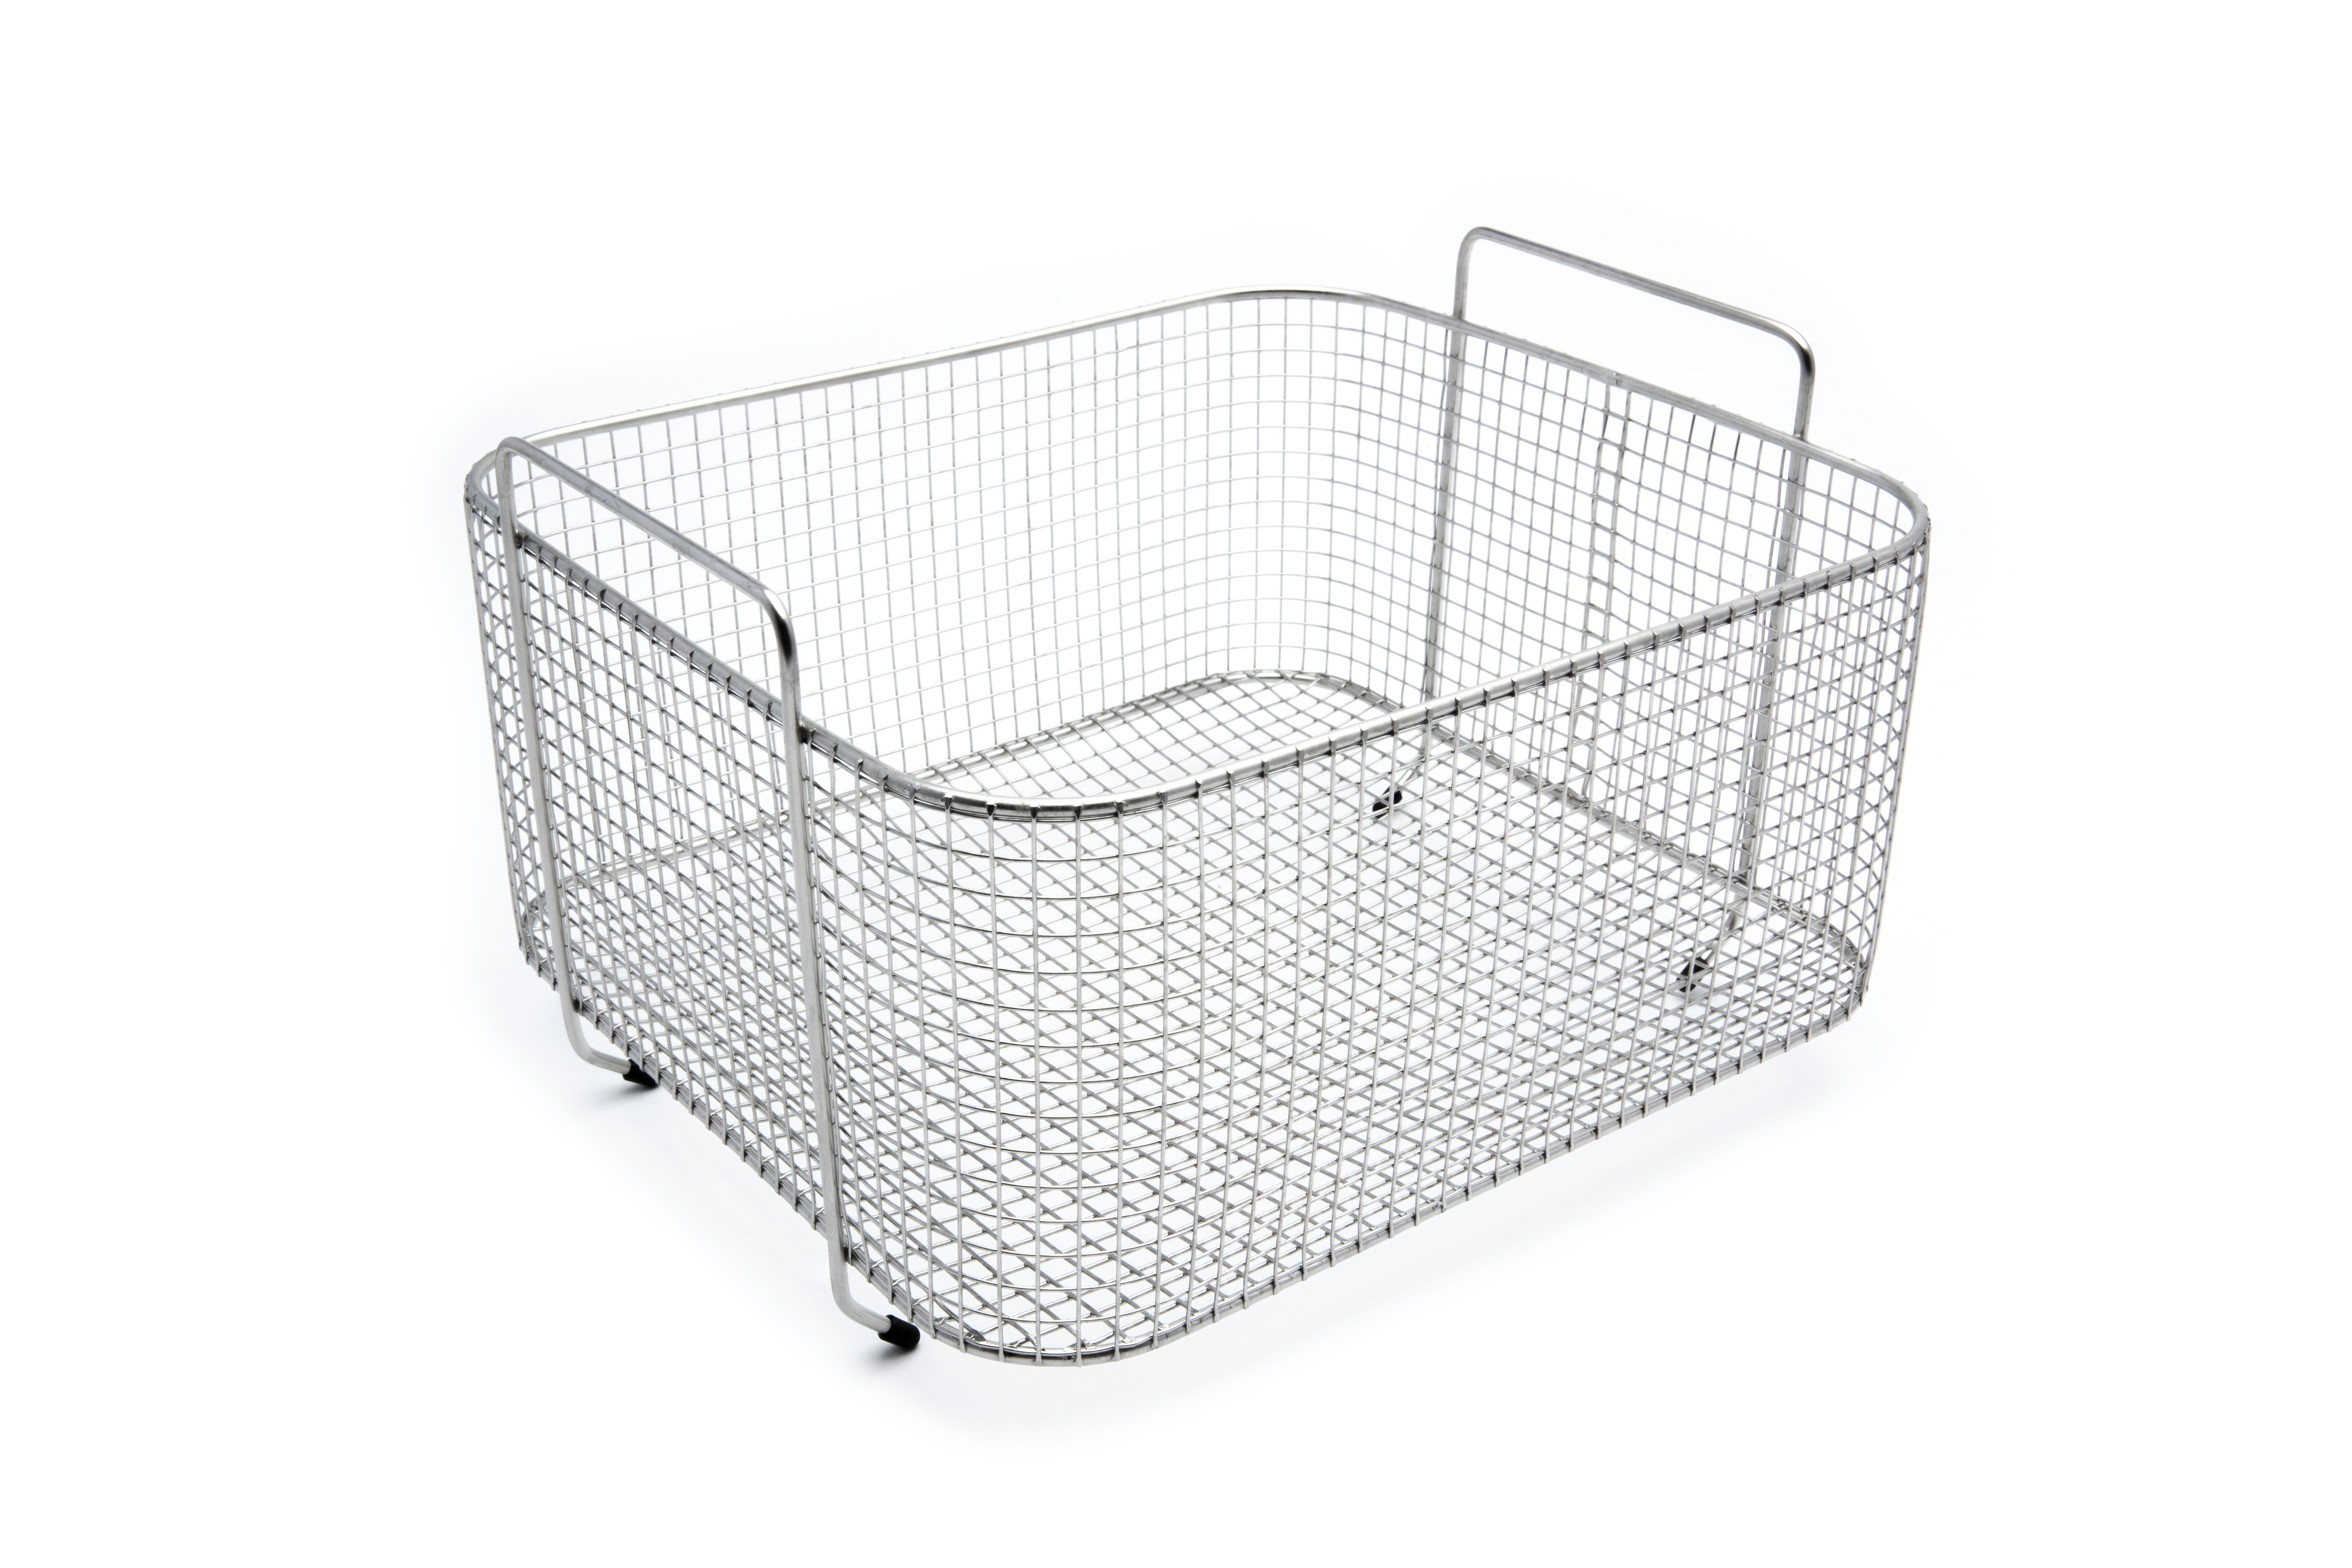 xAB18 - Grant Instruments Stainless Steel Replacement Baskets XUBA And XUB Analogue Baths